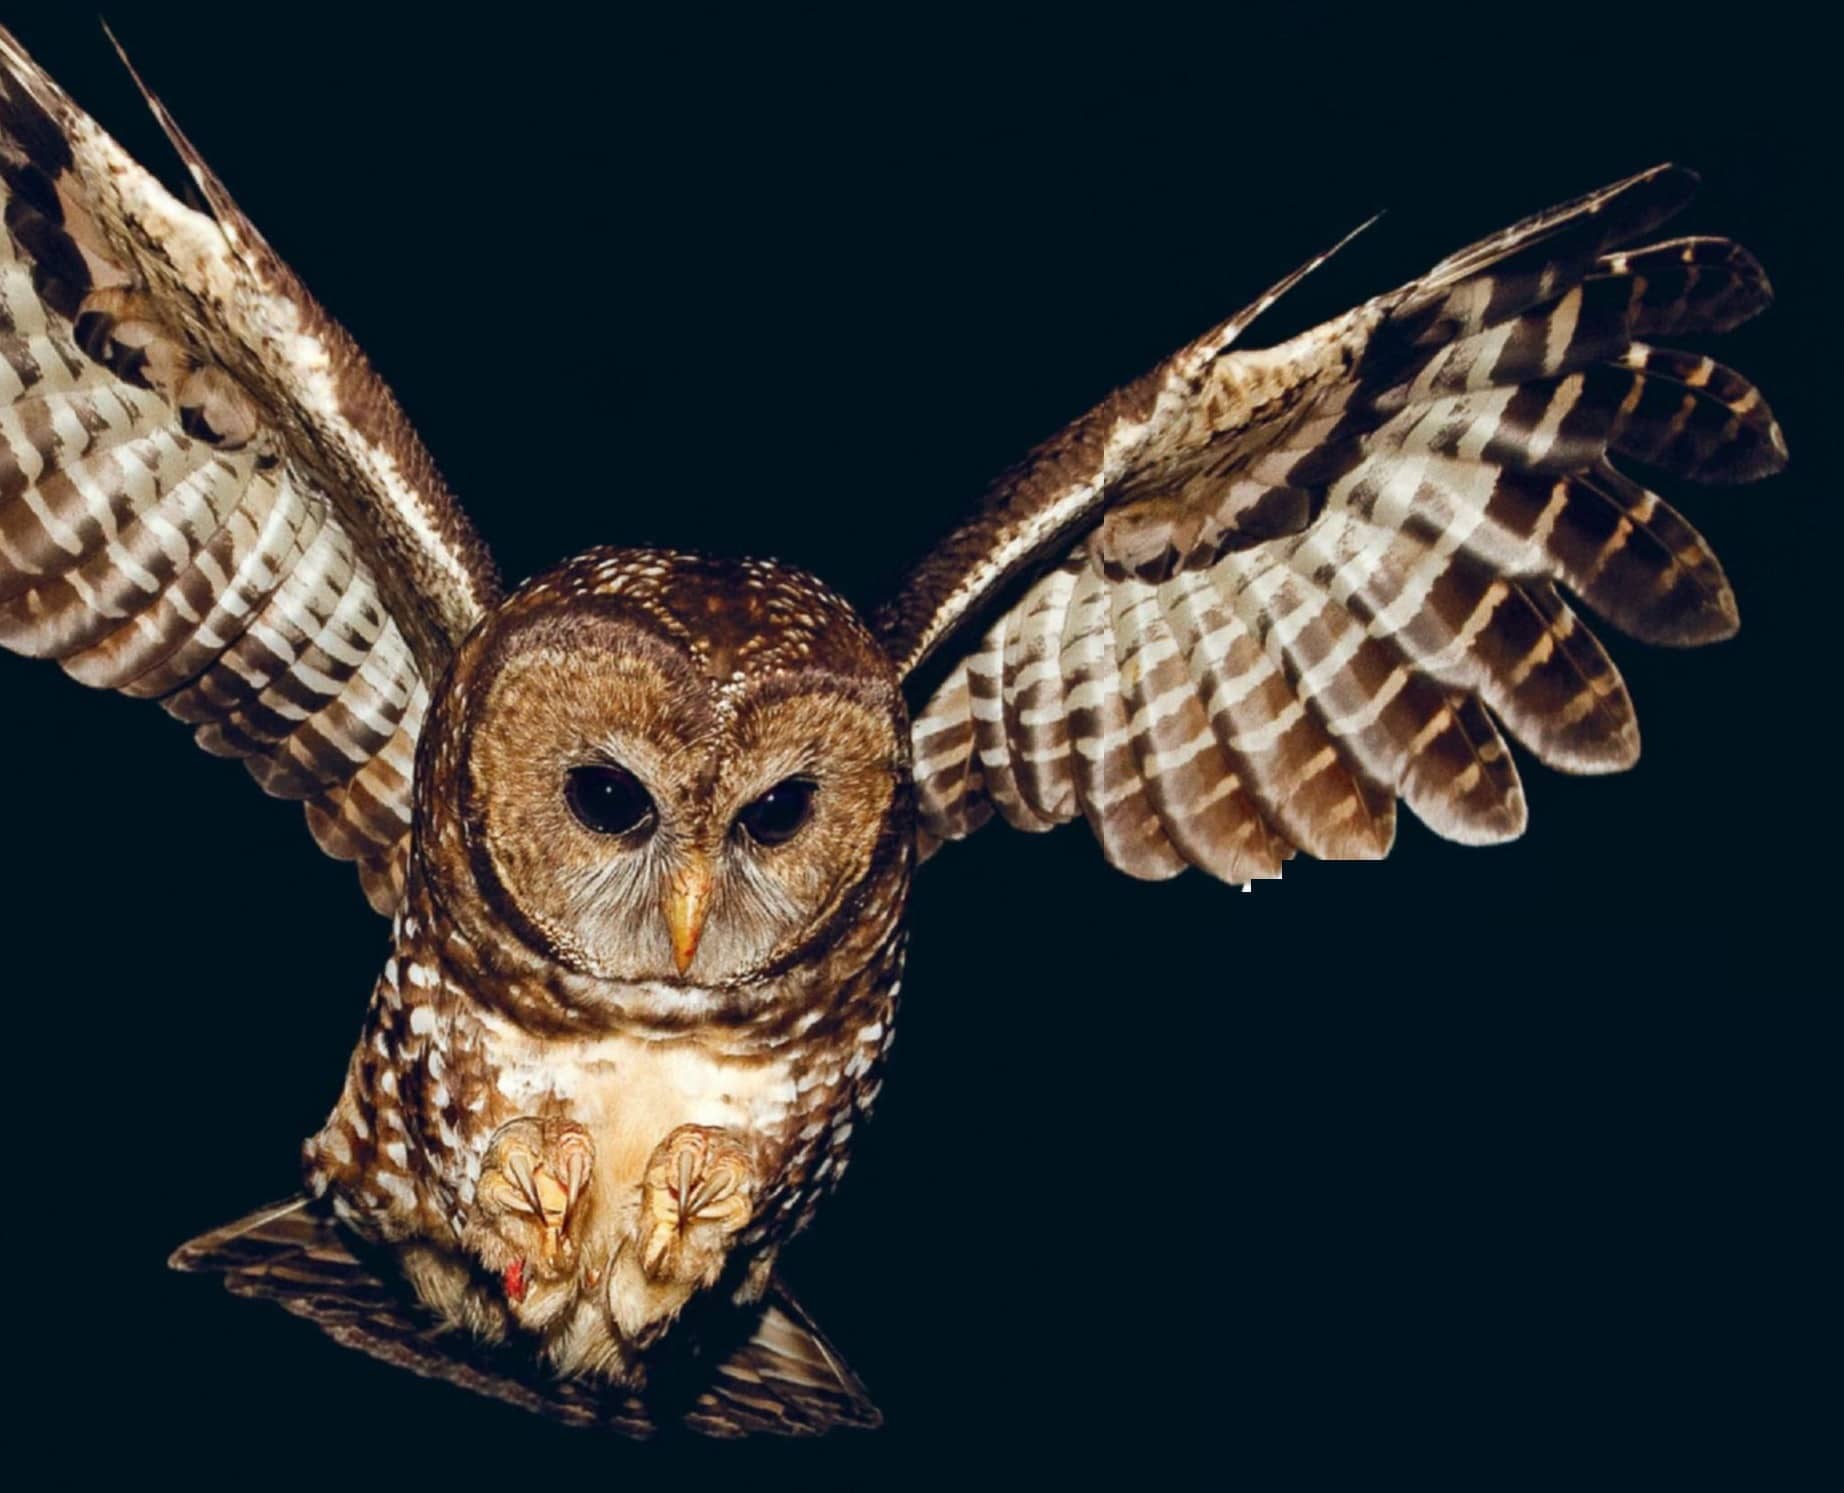 The Government of Canada says spotted owls in Canada are "highly vulnerable to extinction." (Ecojustice)